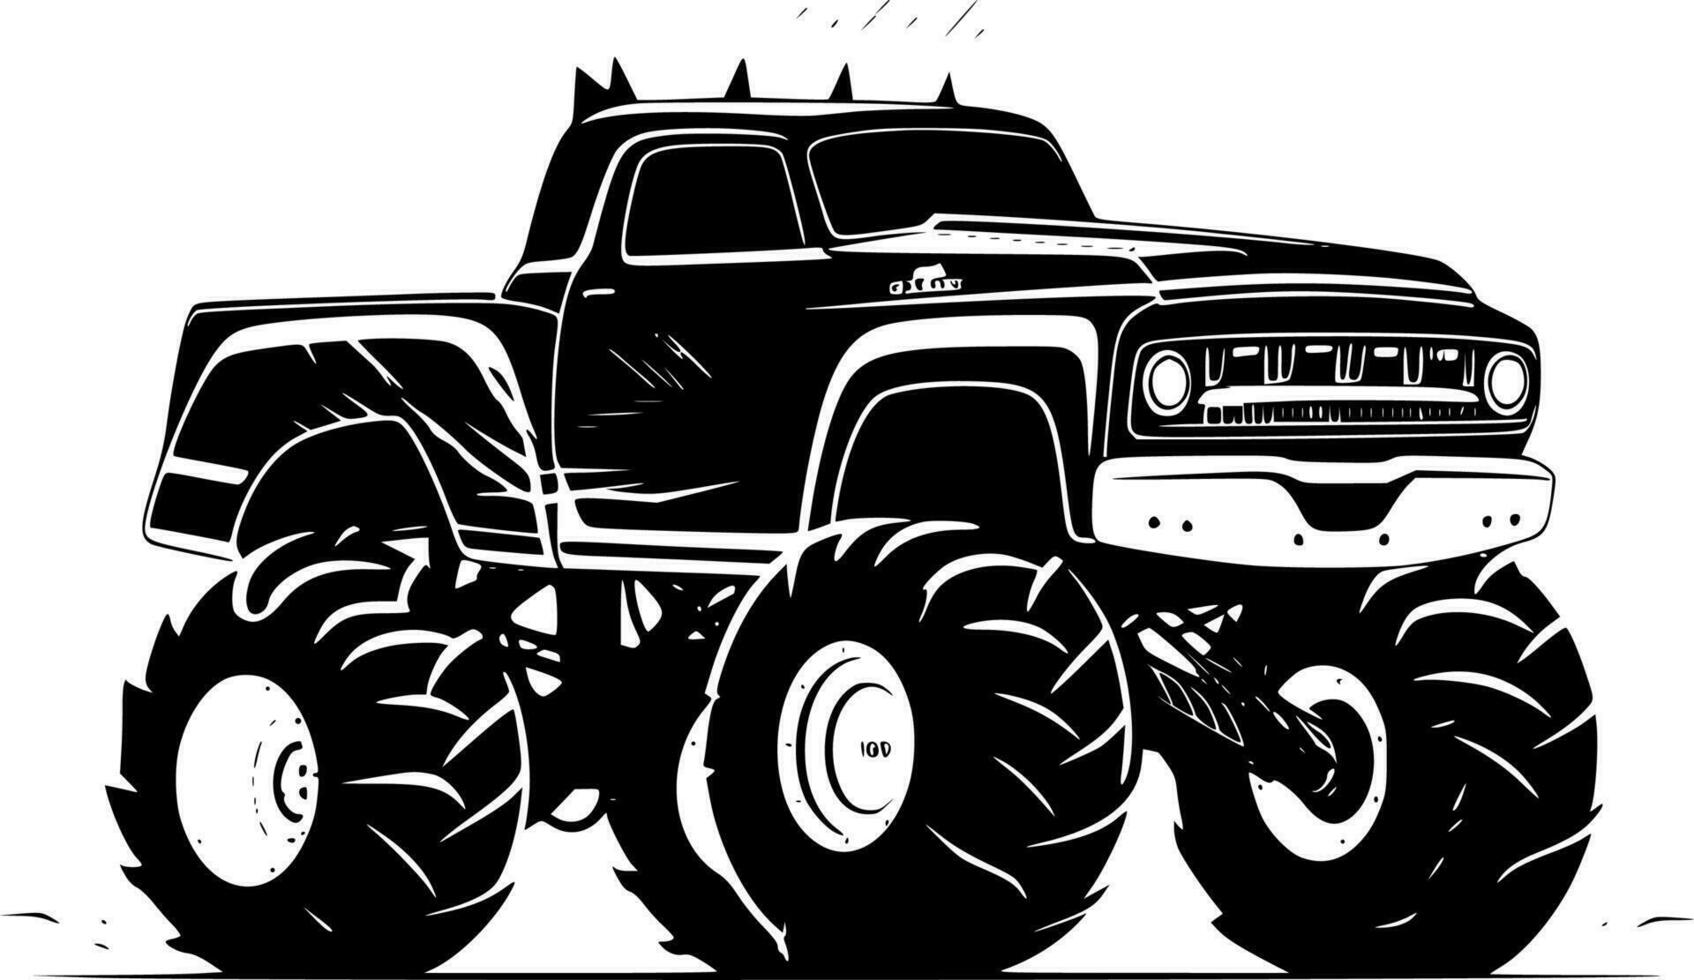 Monster Truck, Minimalist and Simple Silhouette - Vector illustration